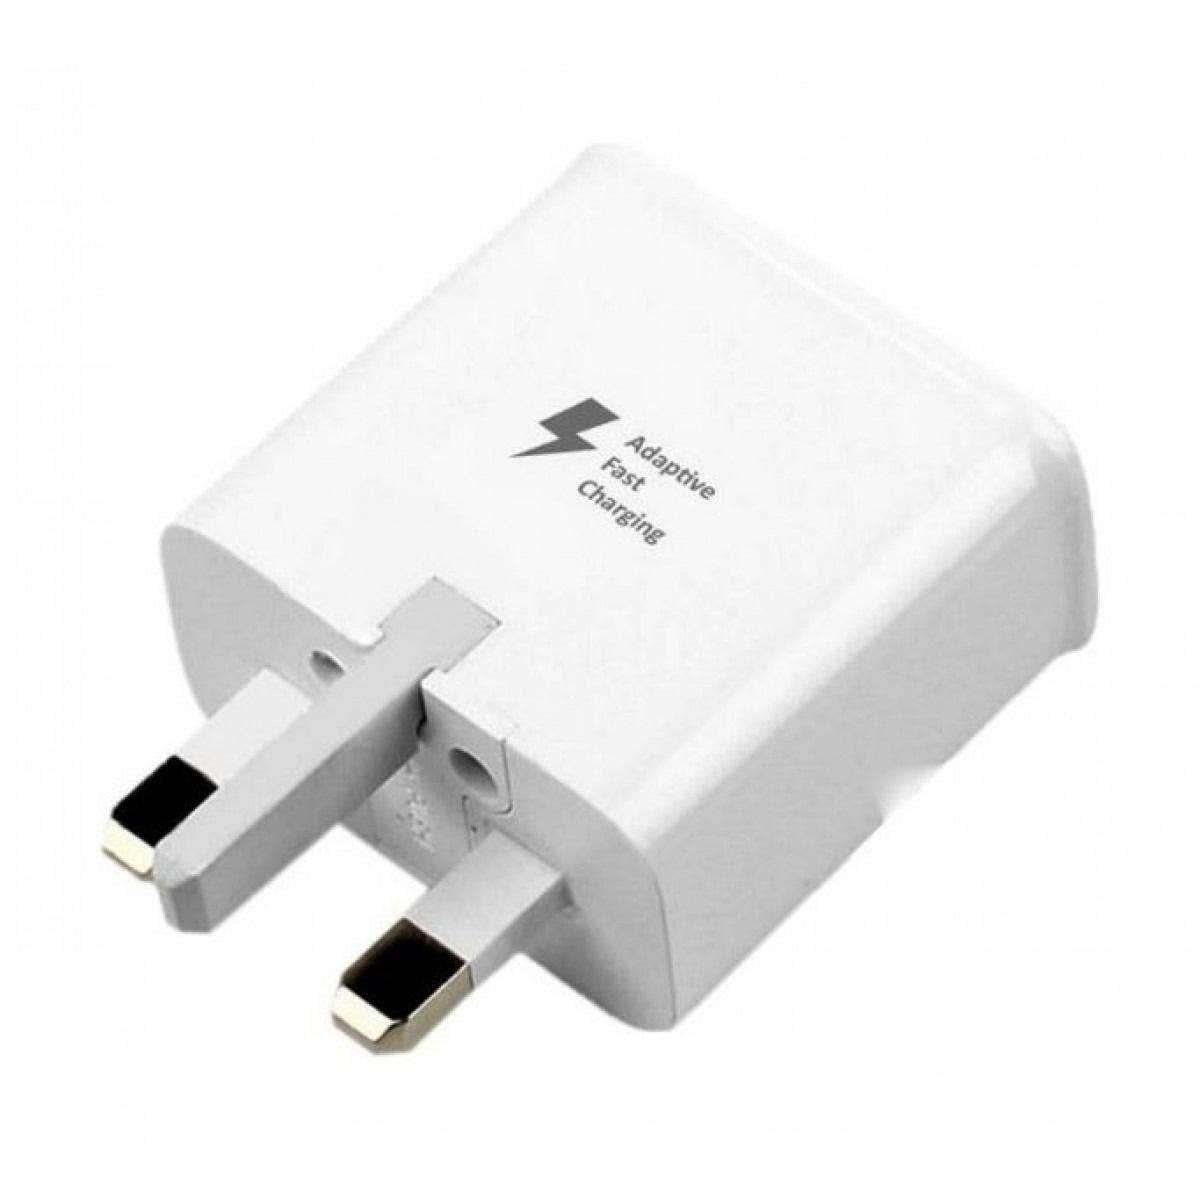 Samsung Wall Charger for Samsung Smartphones, White